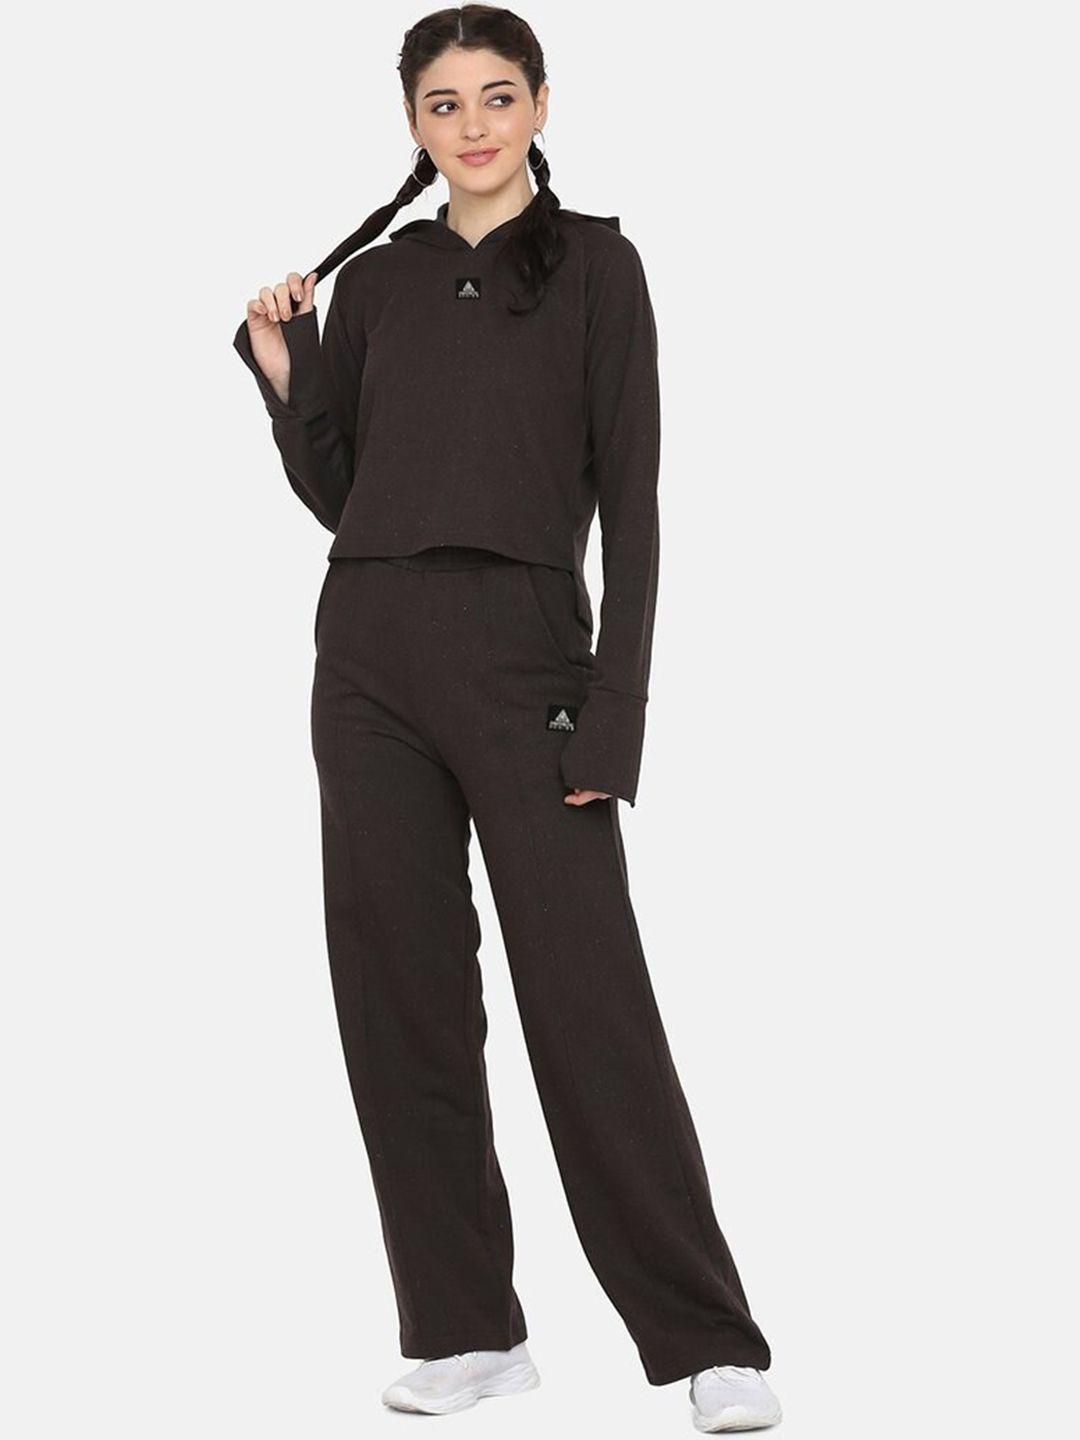 aesthetic bodies women brown solid cotton tracksuit